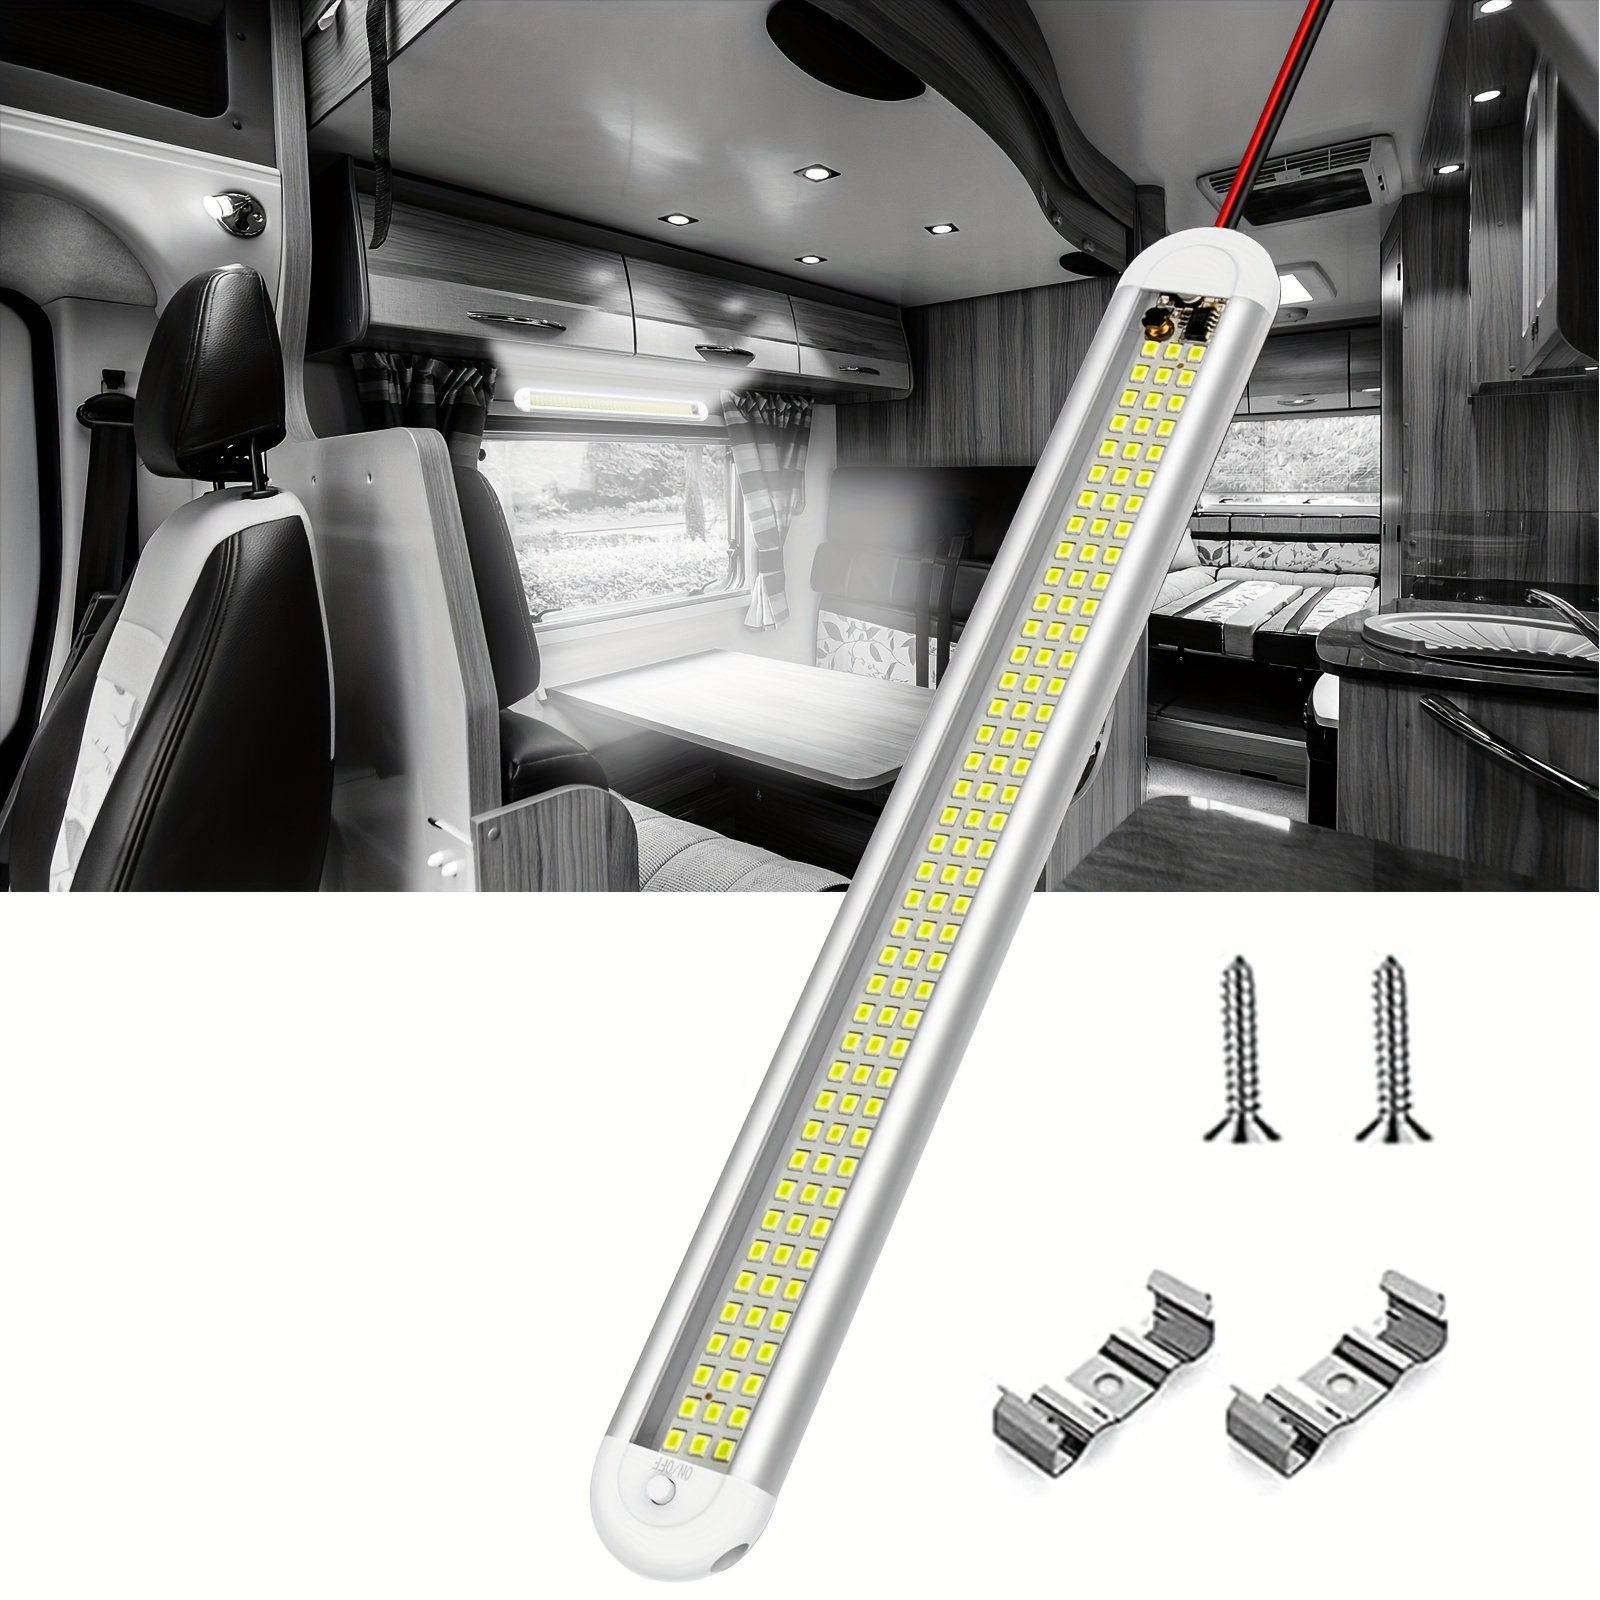 Brighten Up Your Vehicle with this 120LED 1500LM 8W LED Interior Light Bar!